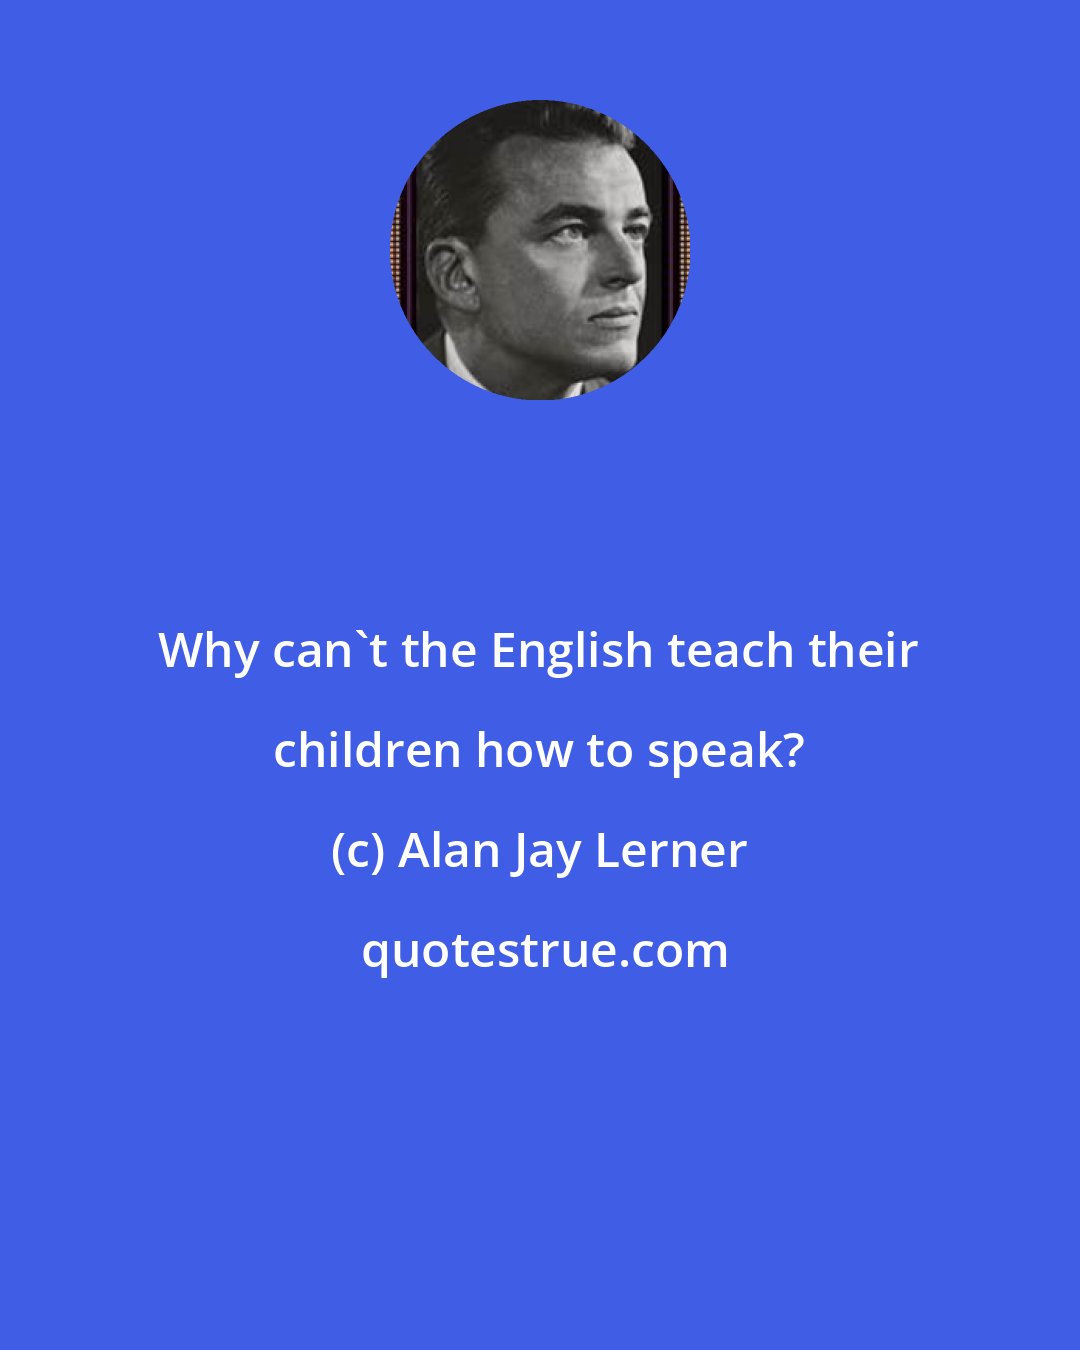 Alan Jay Lerner: Why can't the English teach their children how to speak?